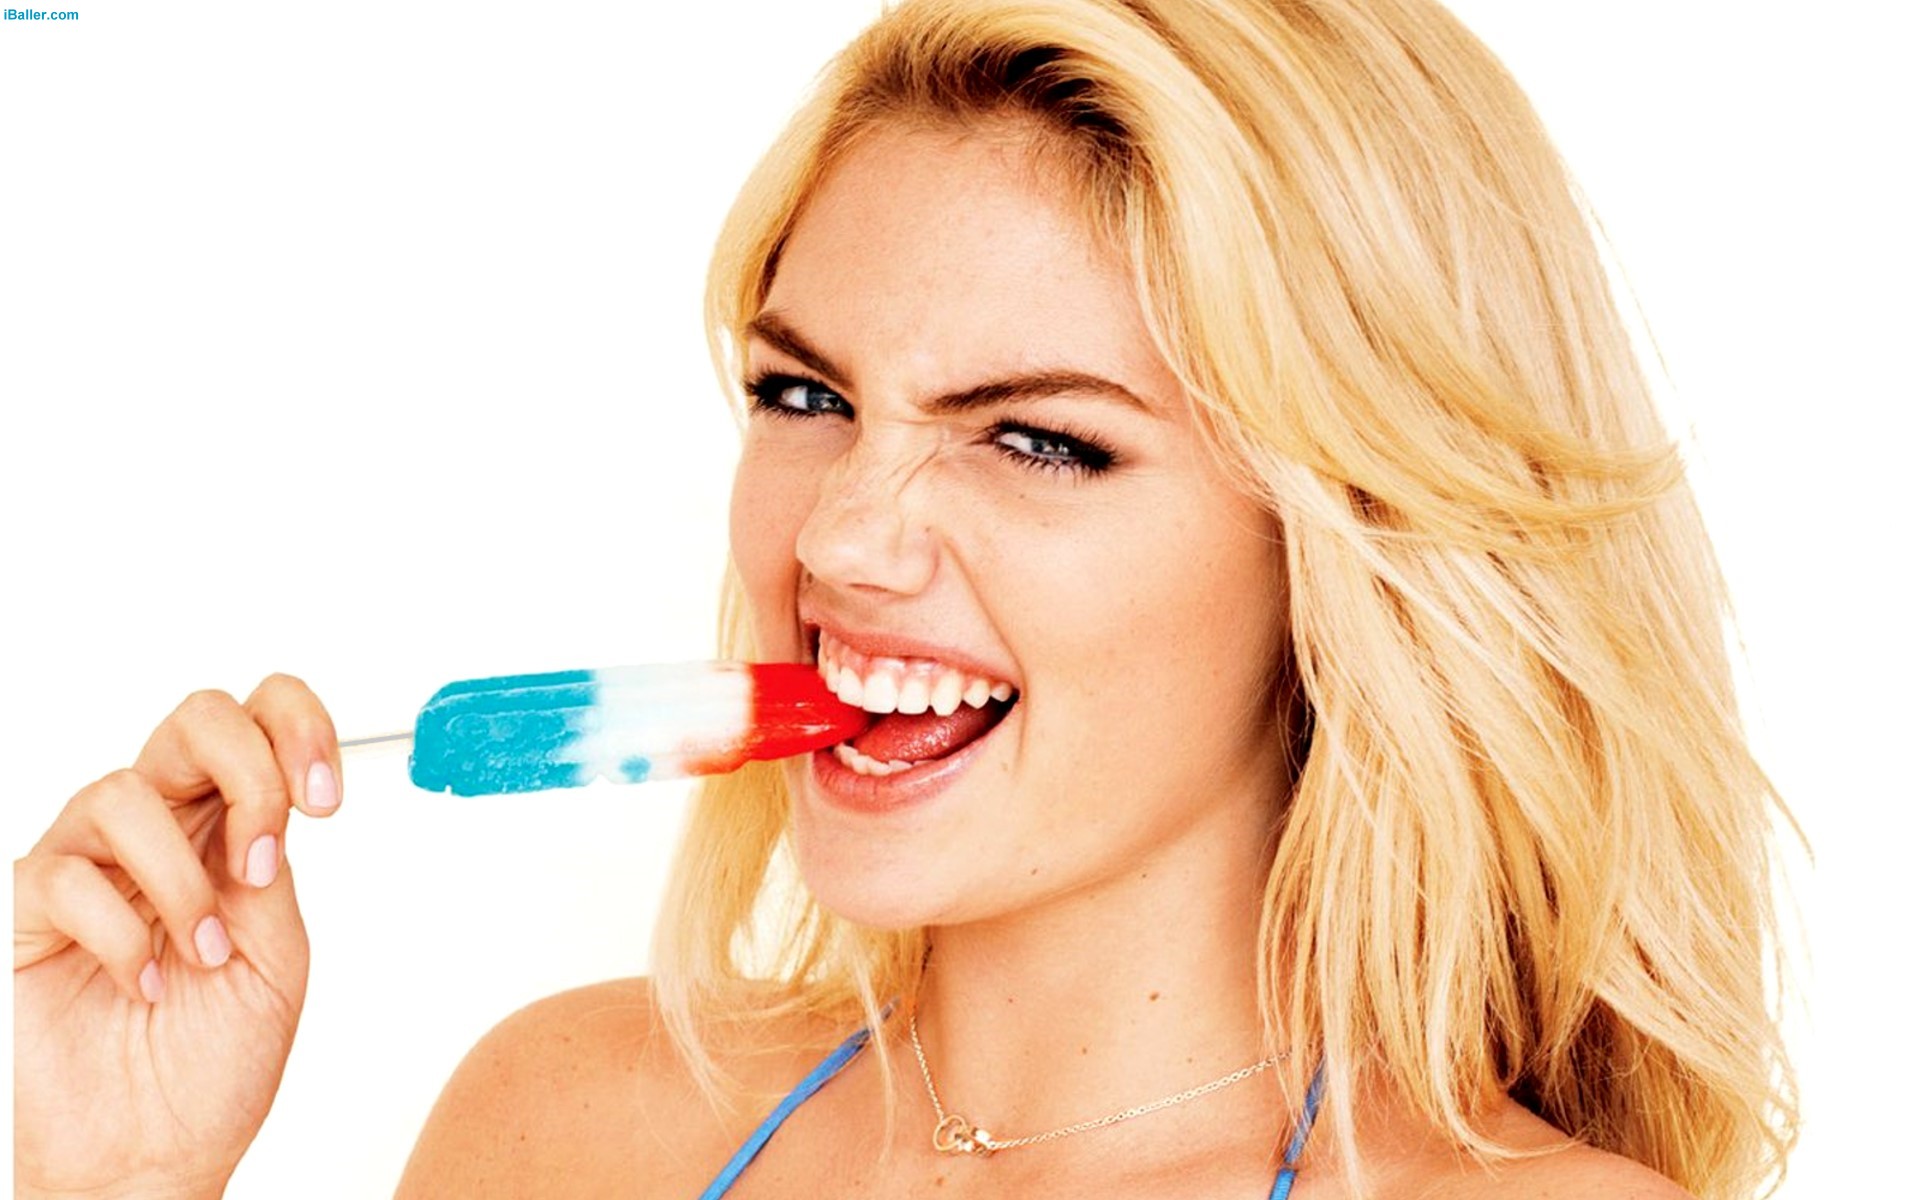 Kate Upton New Wallpaper And Image For Your Phone Secreen